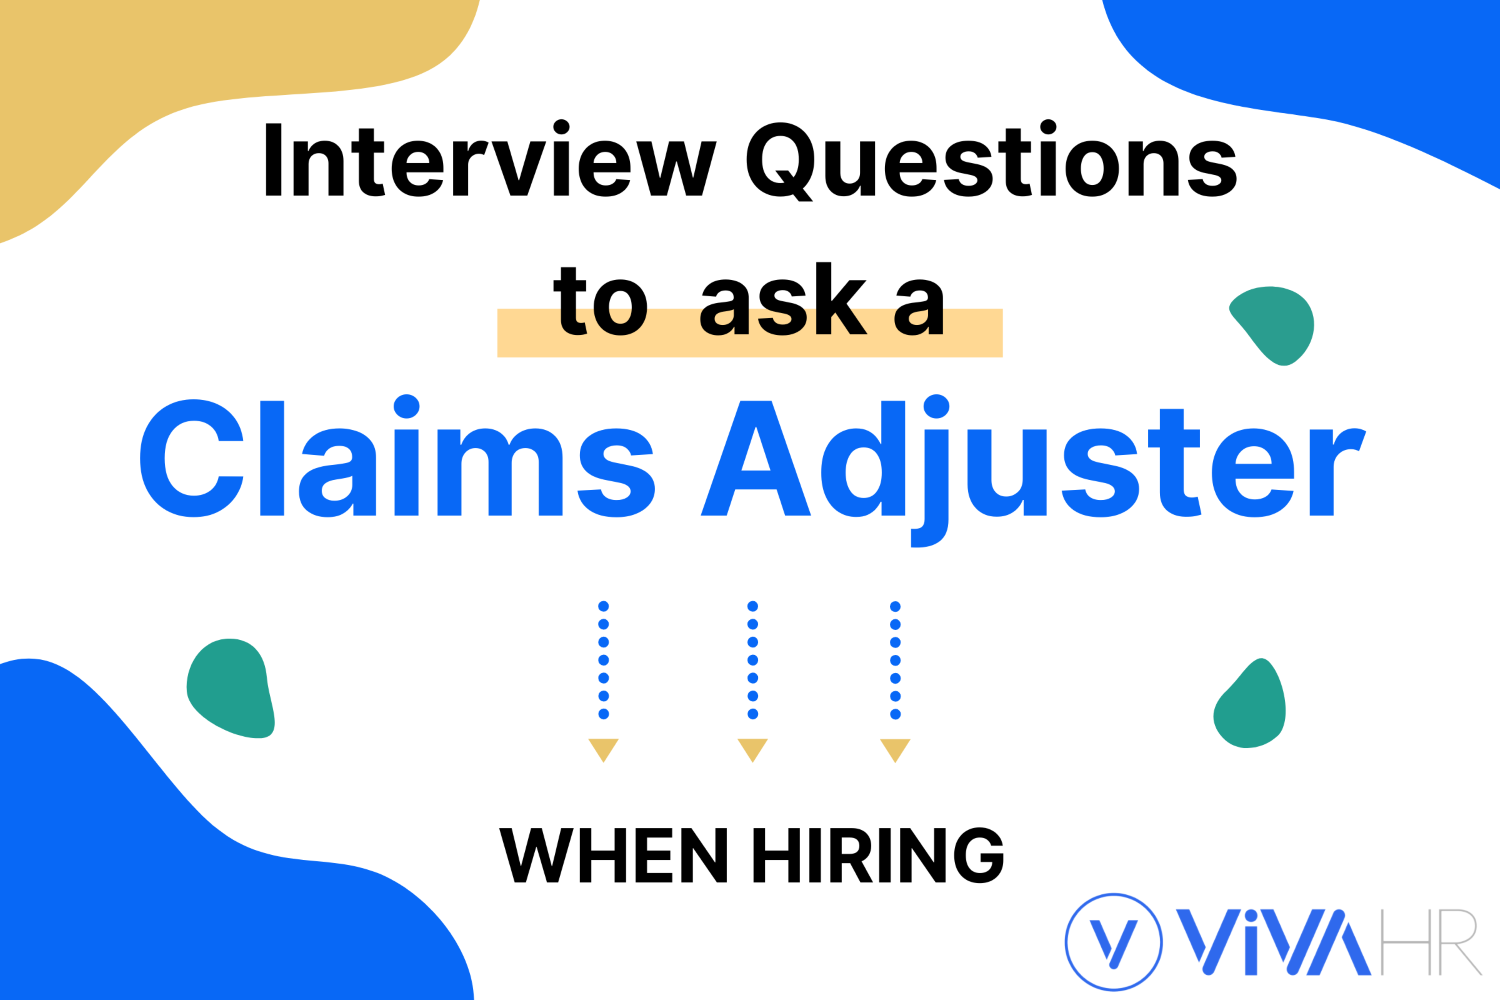 Claims Adjuster Interview Questions